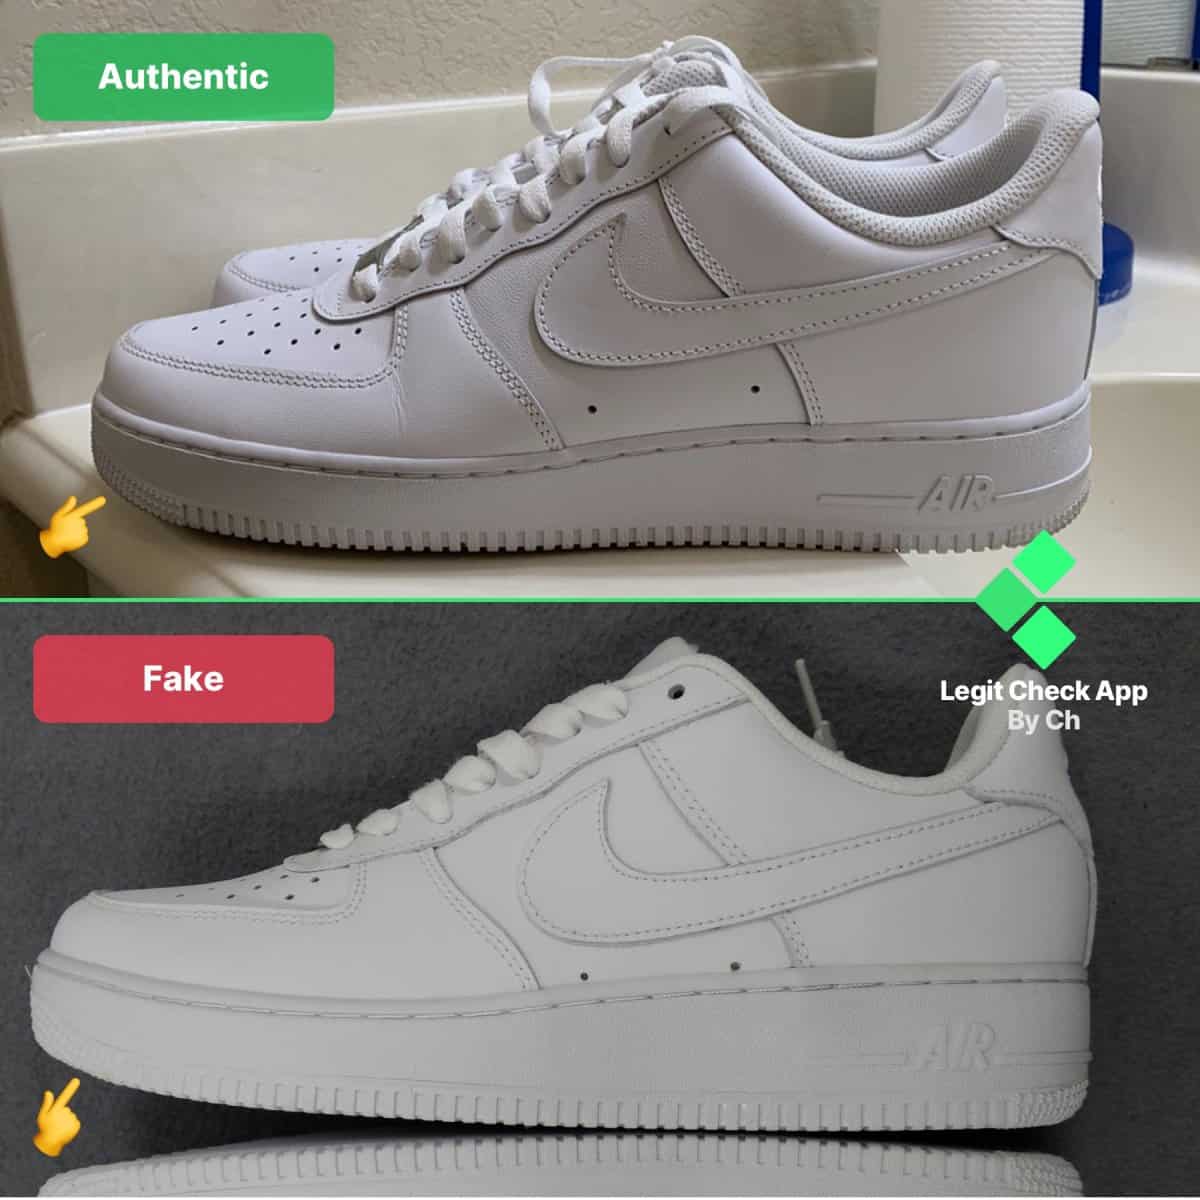 To Spot Fake Nike Air Force 1 Sneakers 